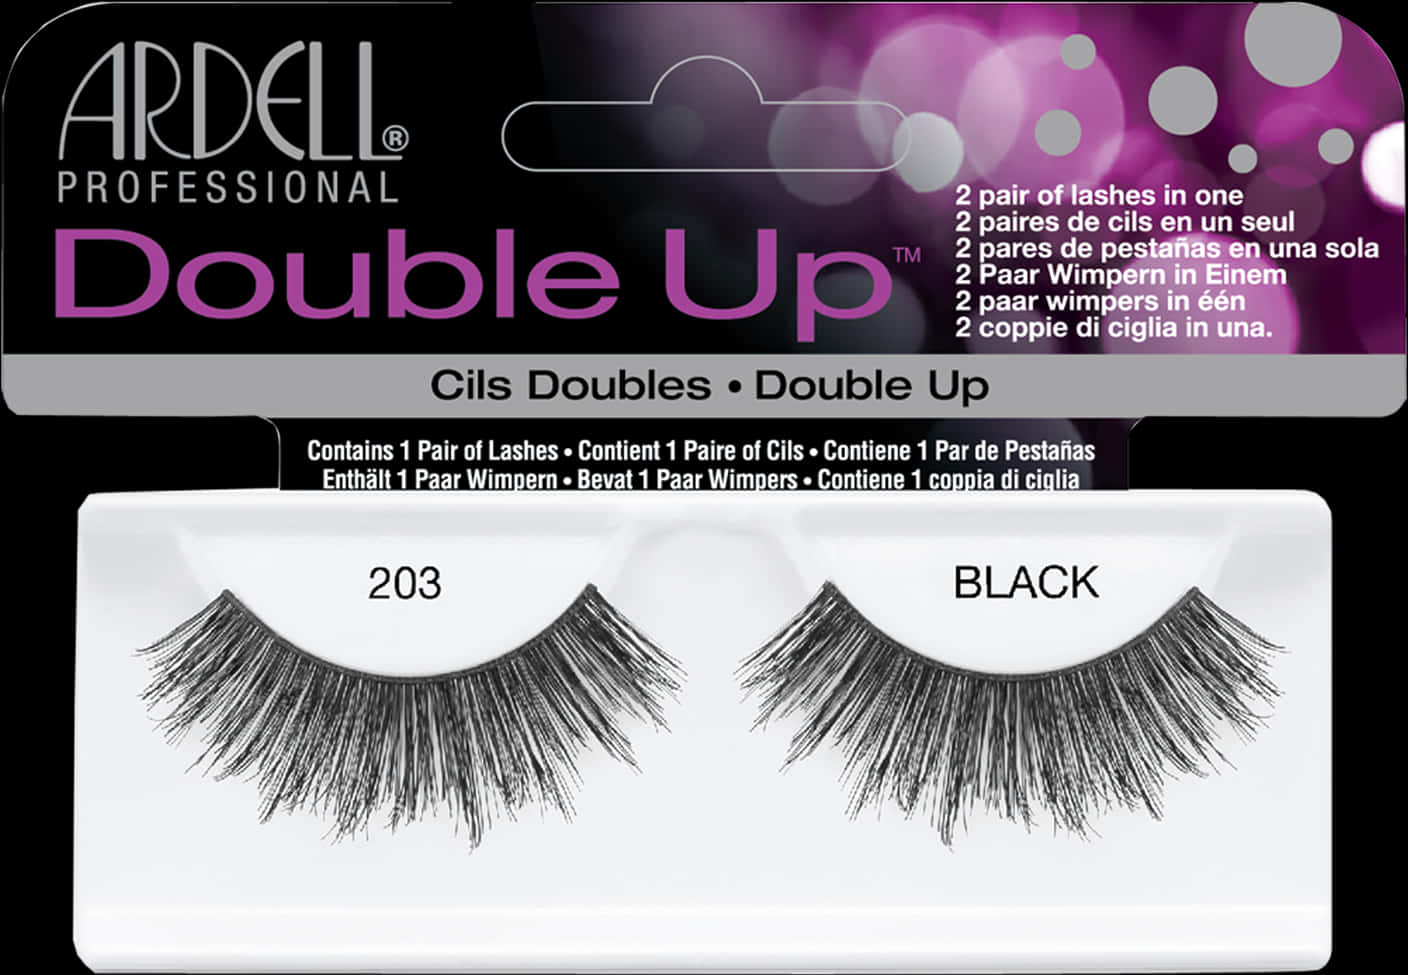 A Pair Of False Eyelashes In A Package